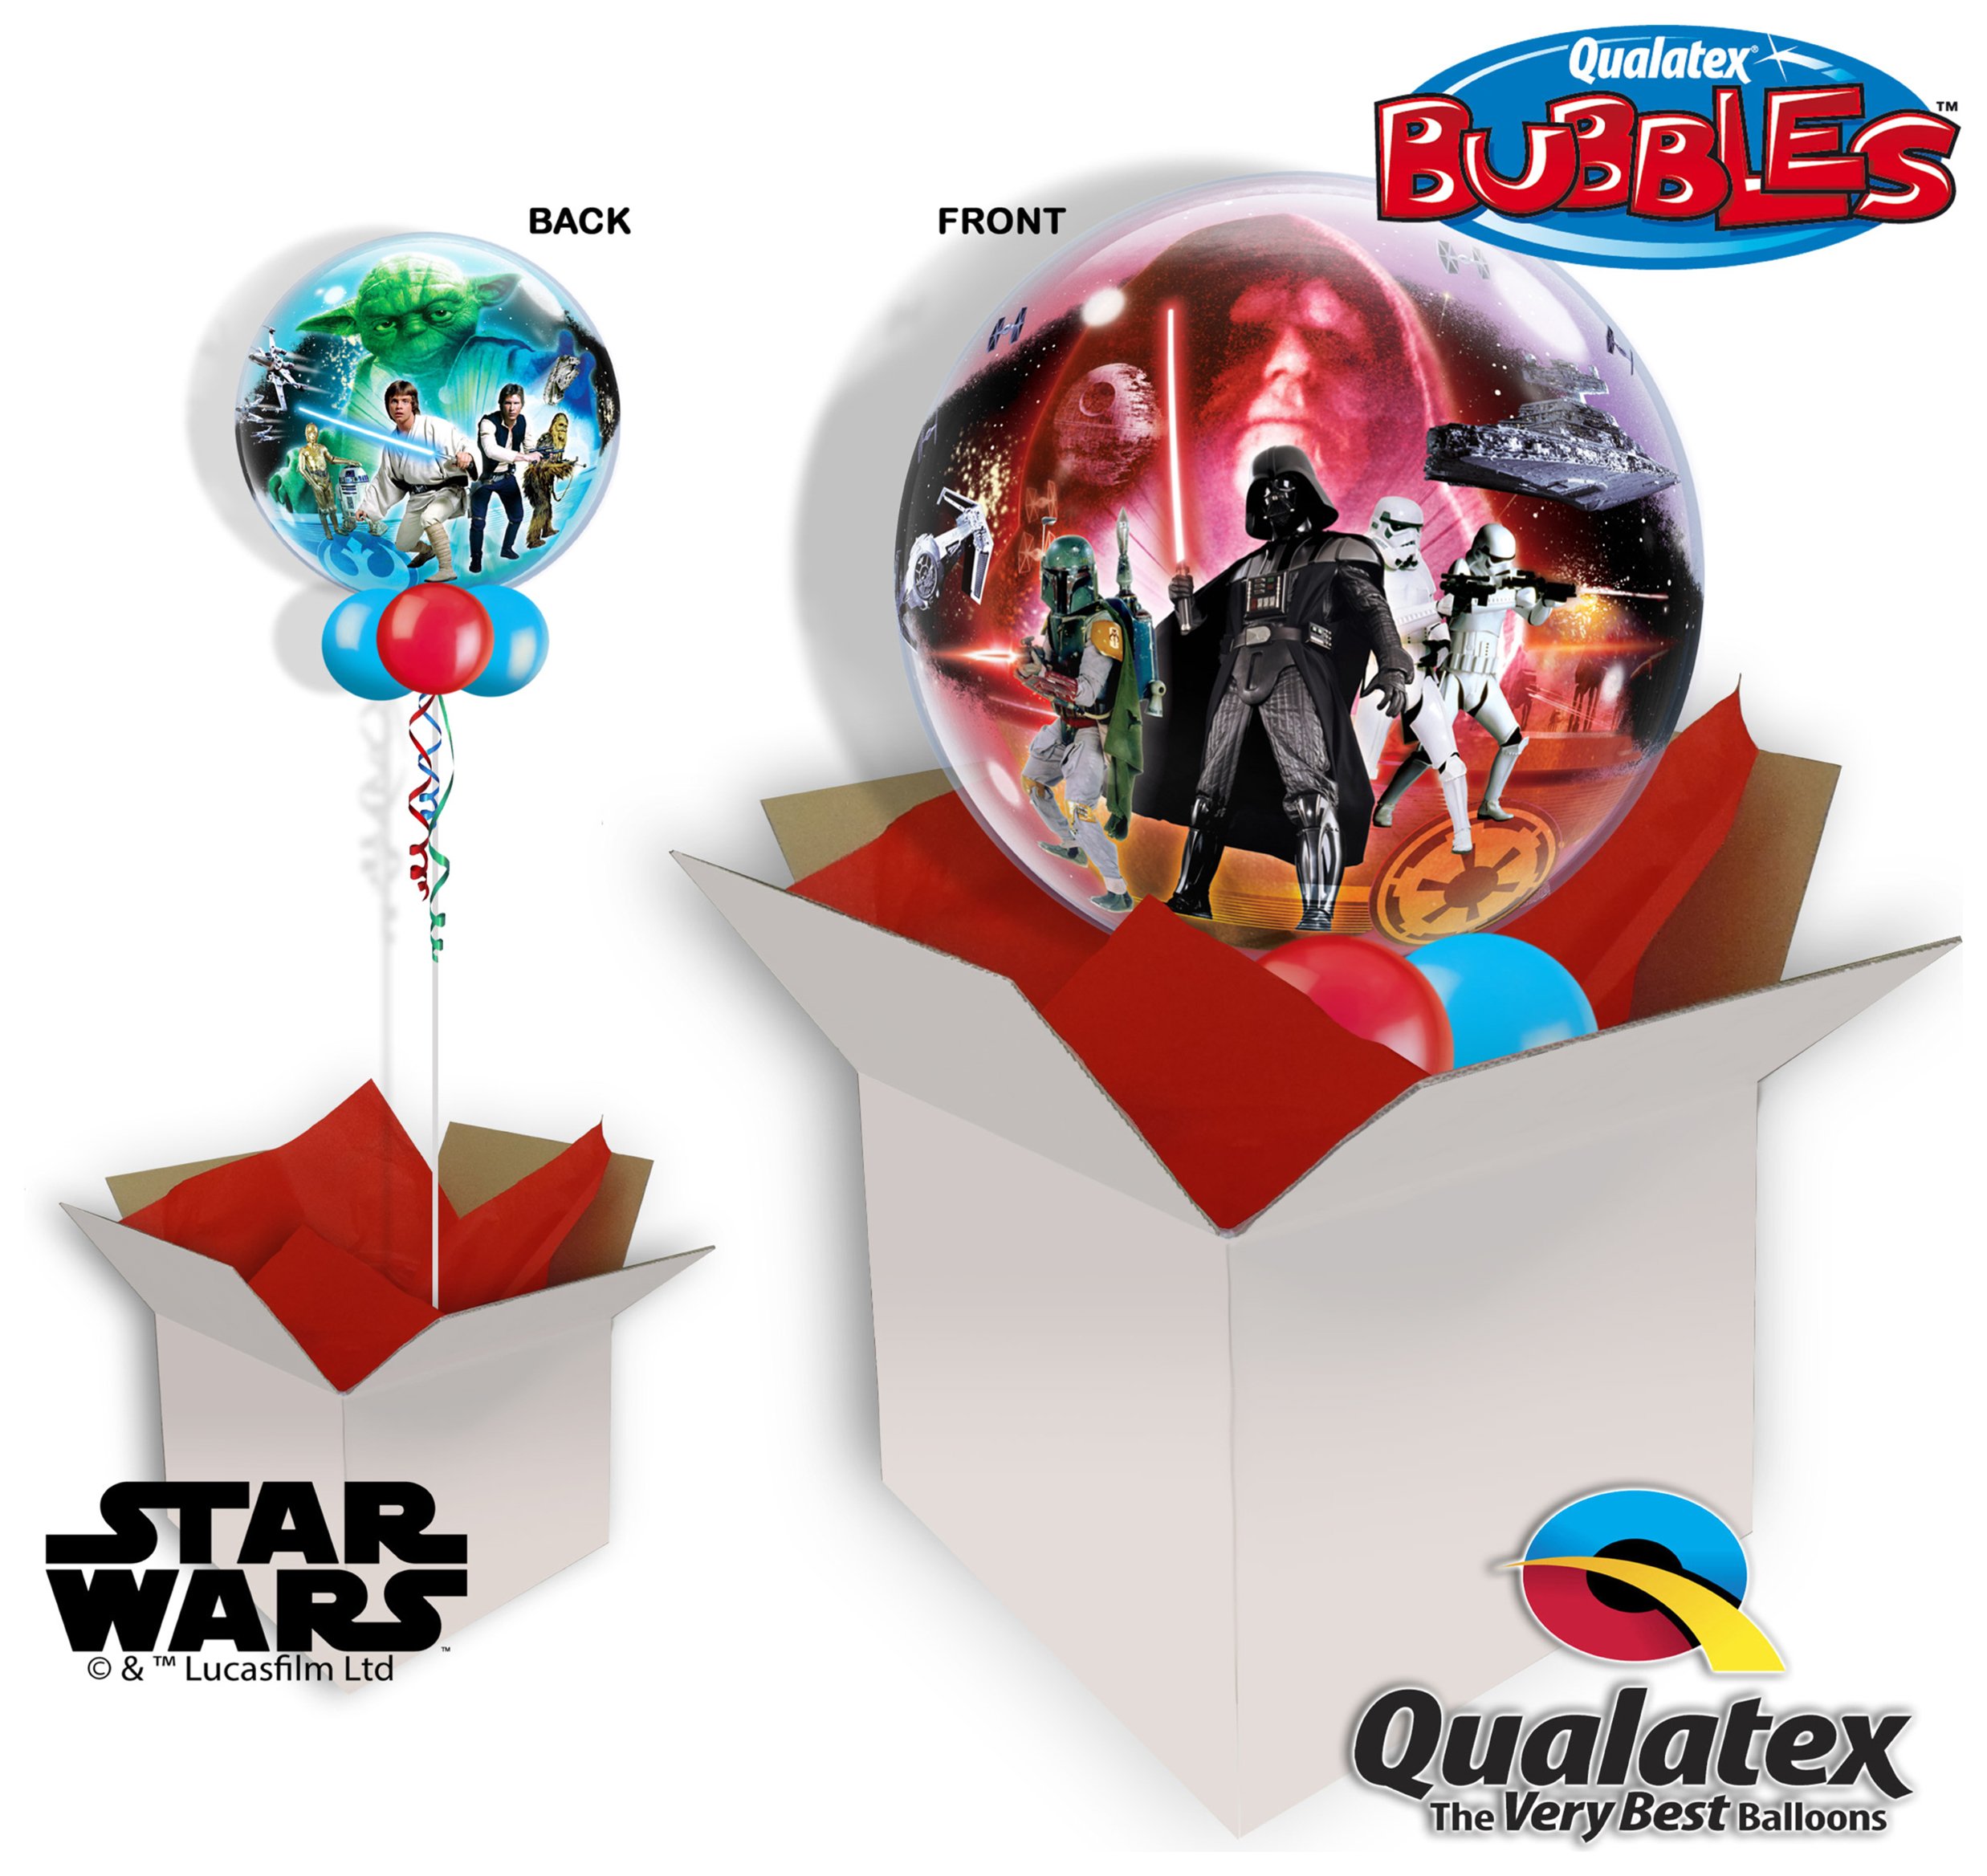 Star Wars 22 Inch Bubble Balloon In A Box review